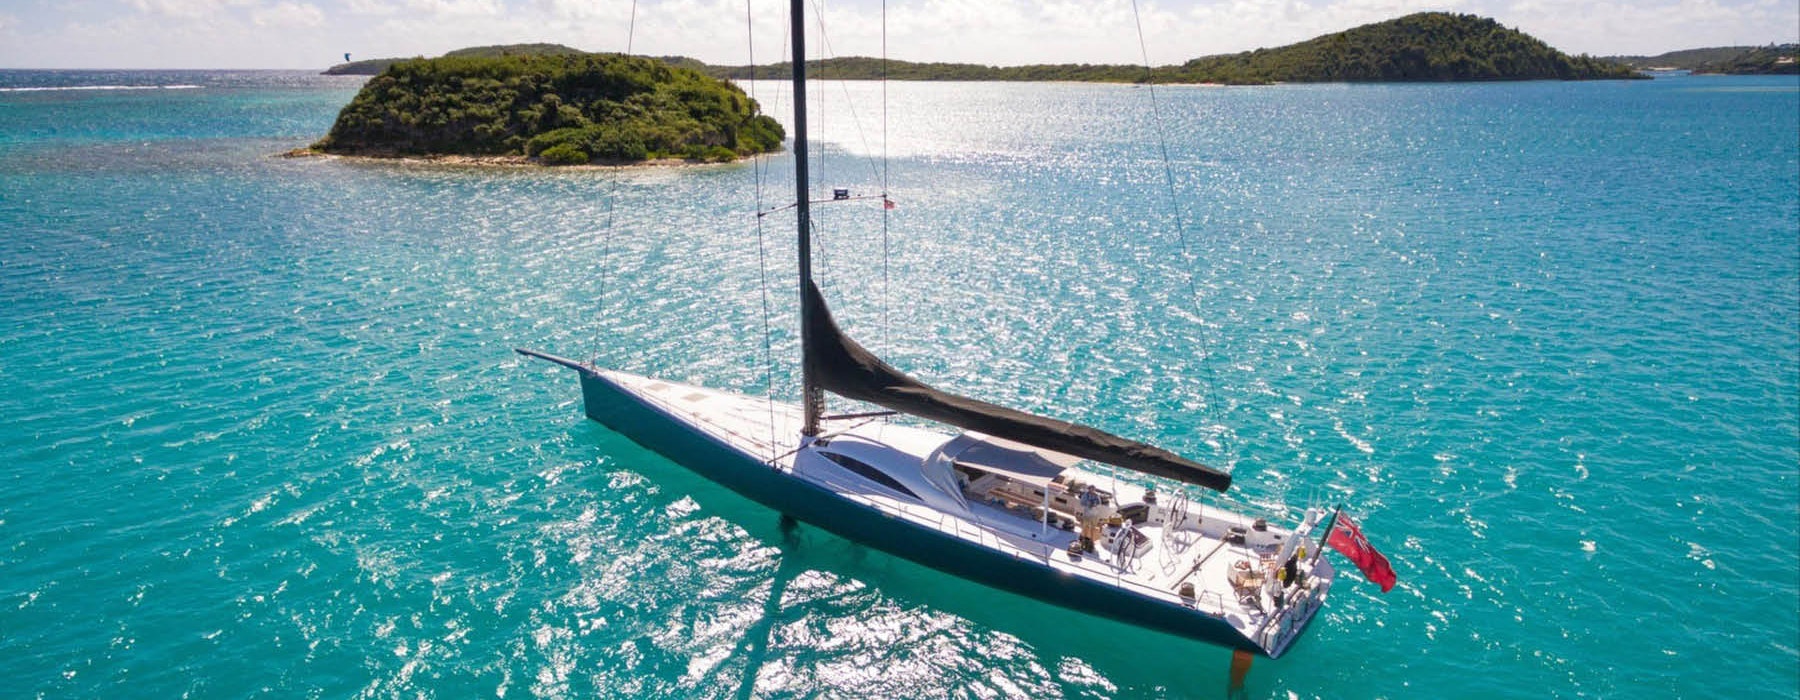 Luxury sailing yacht for charter-LEOPARD 3 McConaghy 30.5m